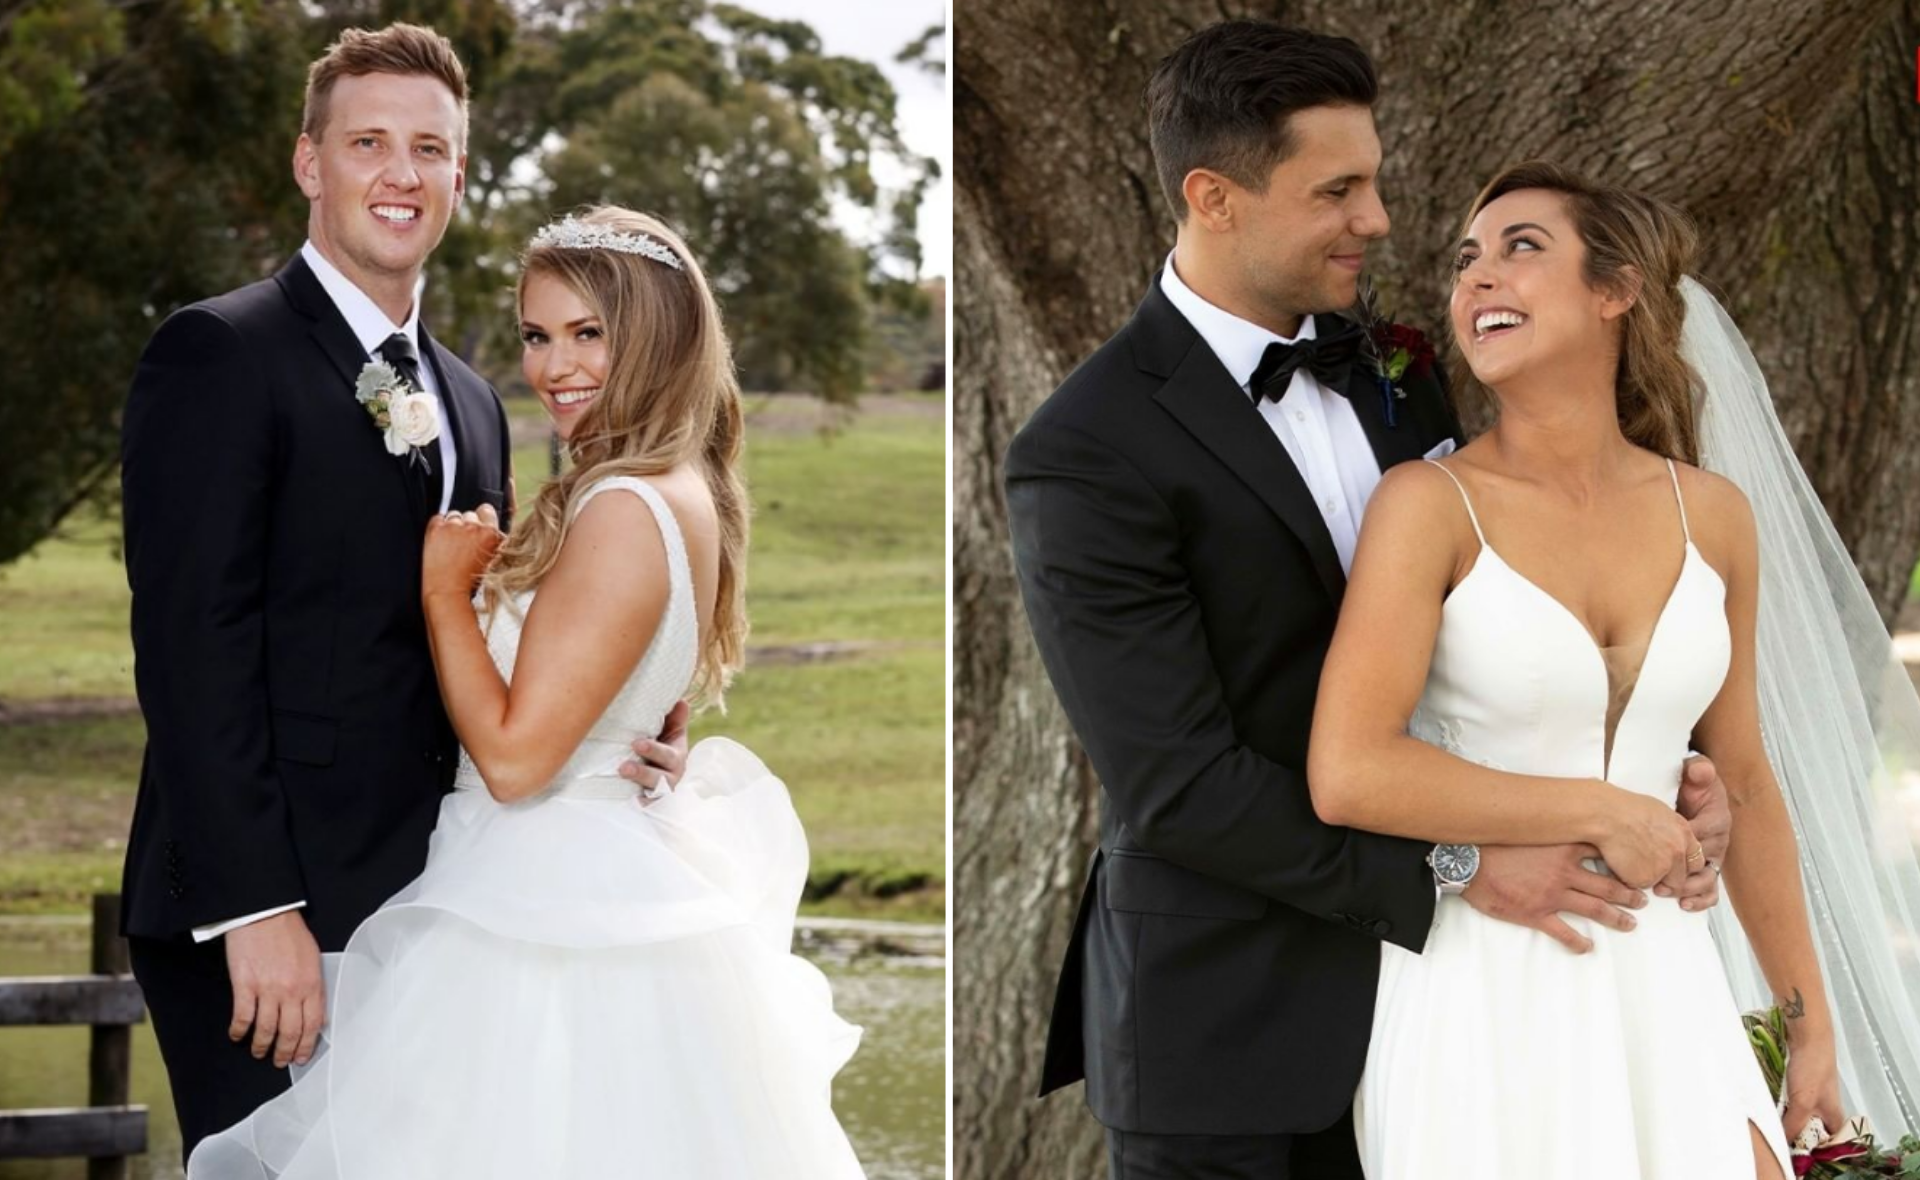 These photos may have just exposed a scandalous Married At First Sight partner swap